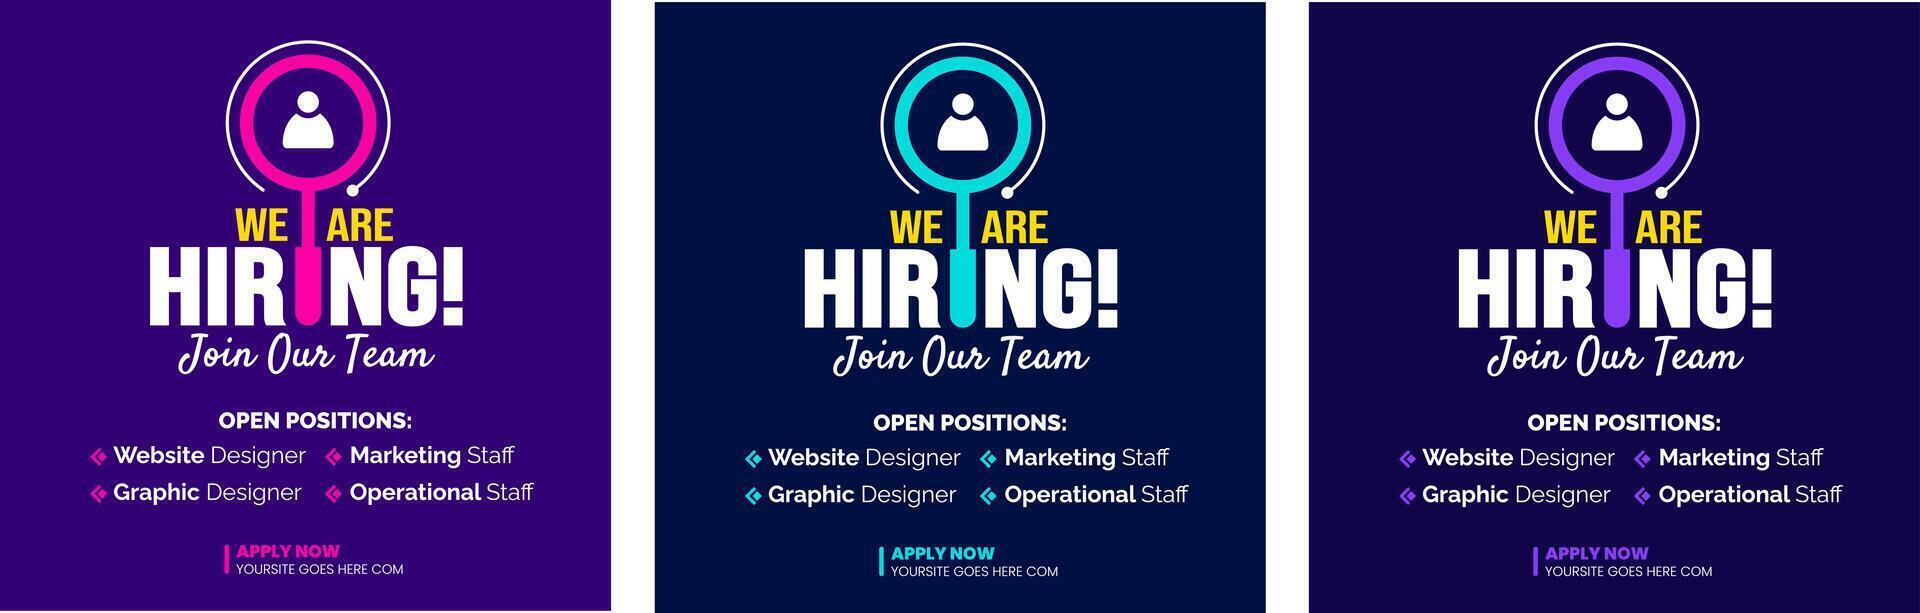 We are hiring job vacancy social media post banner design template set. business concept of search and recruitment. join our team announcement lettering in speech. Vector Illustration.